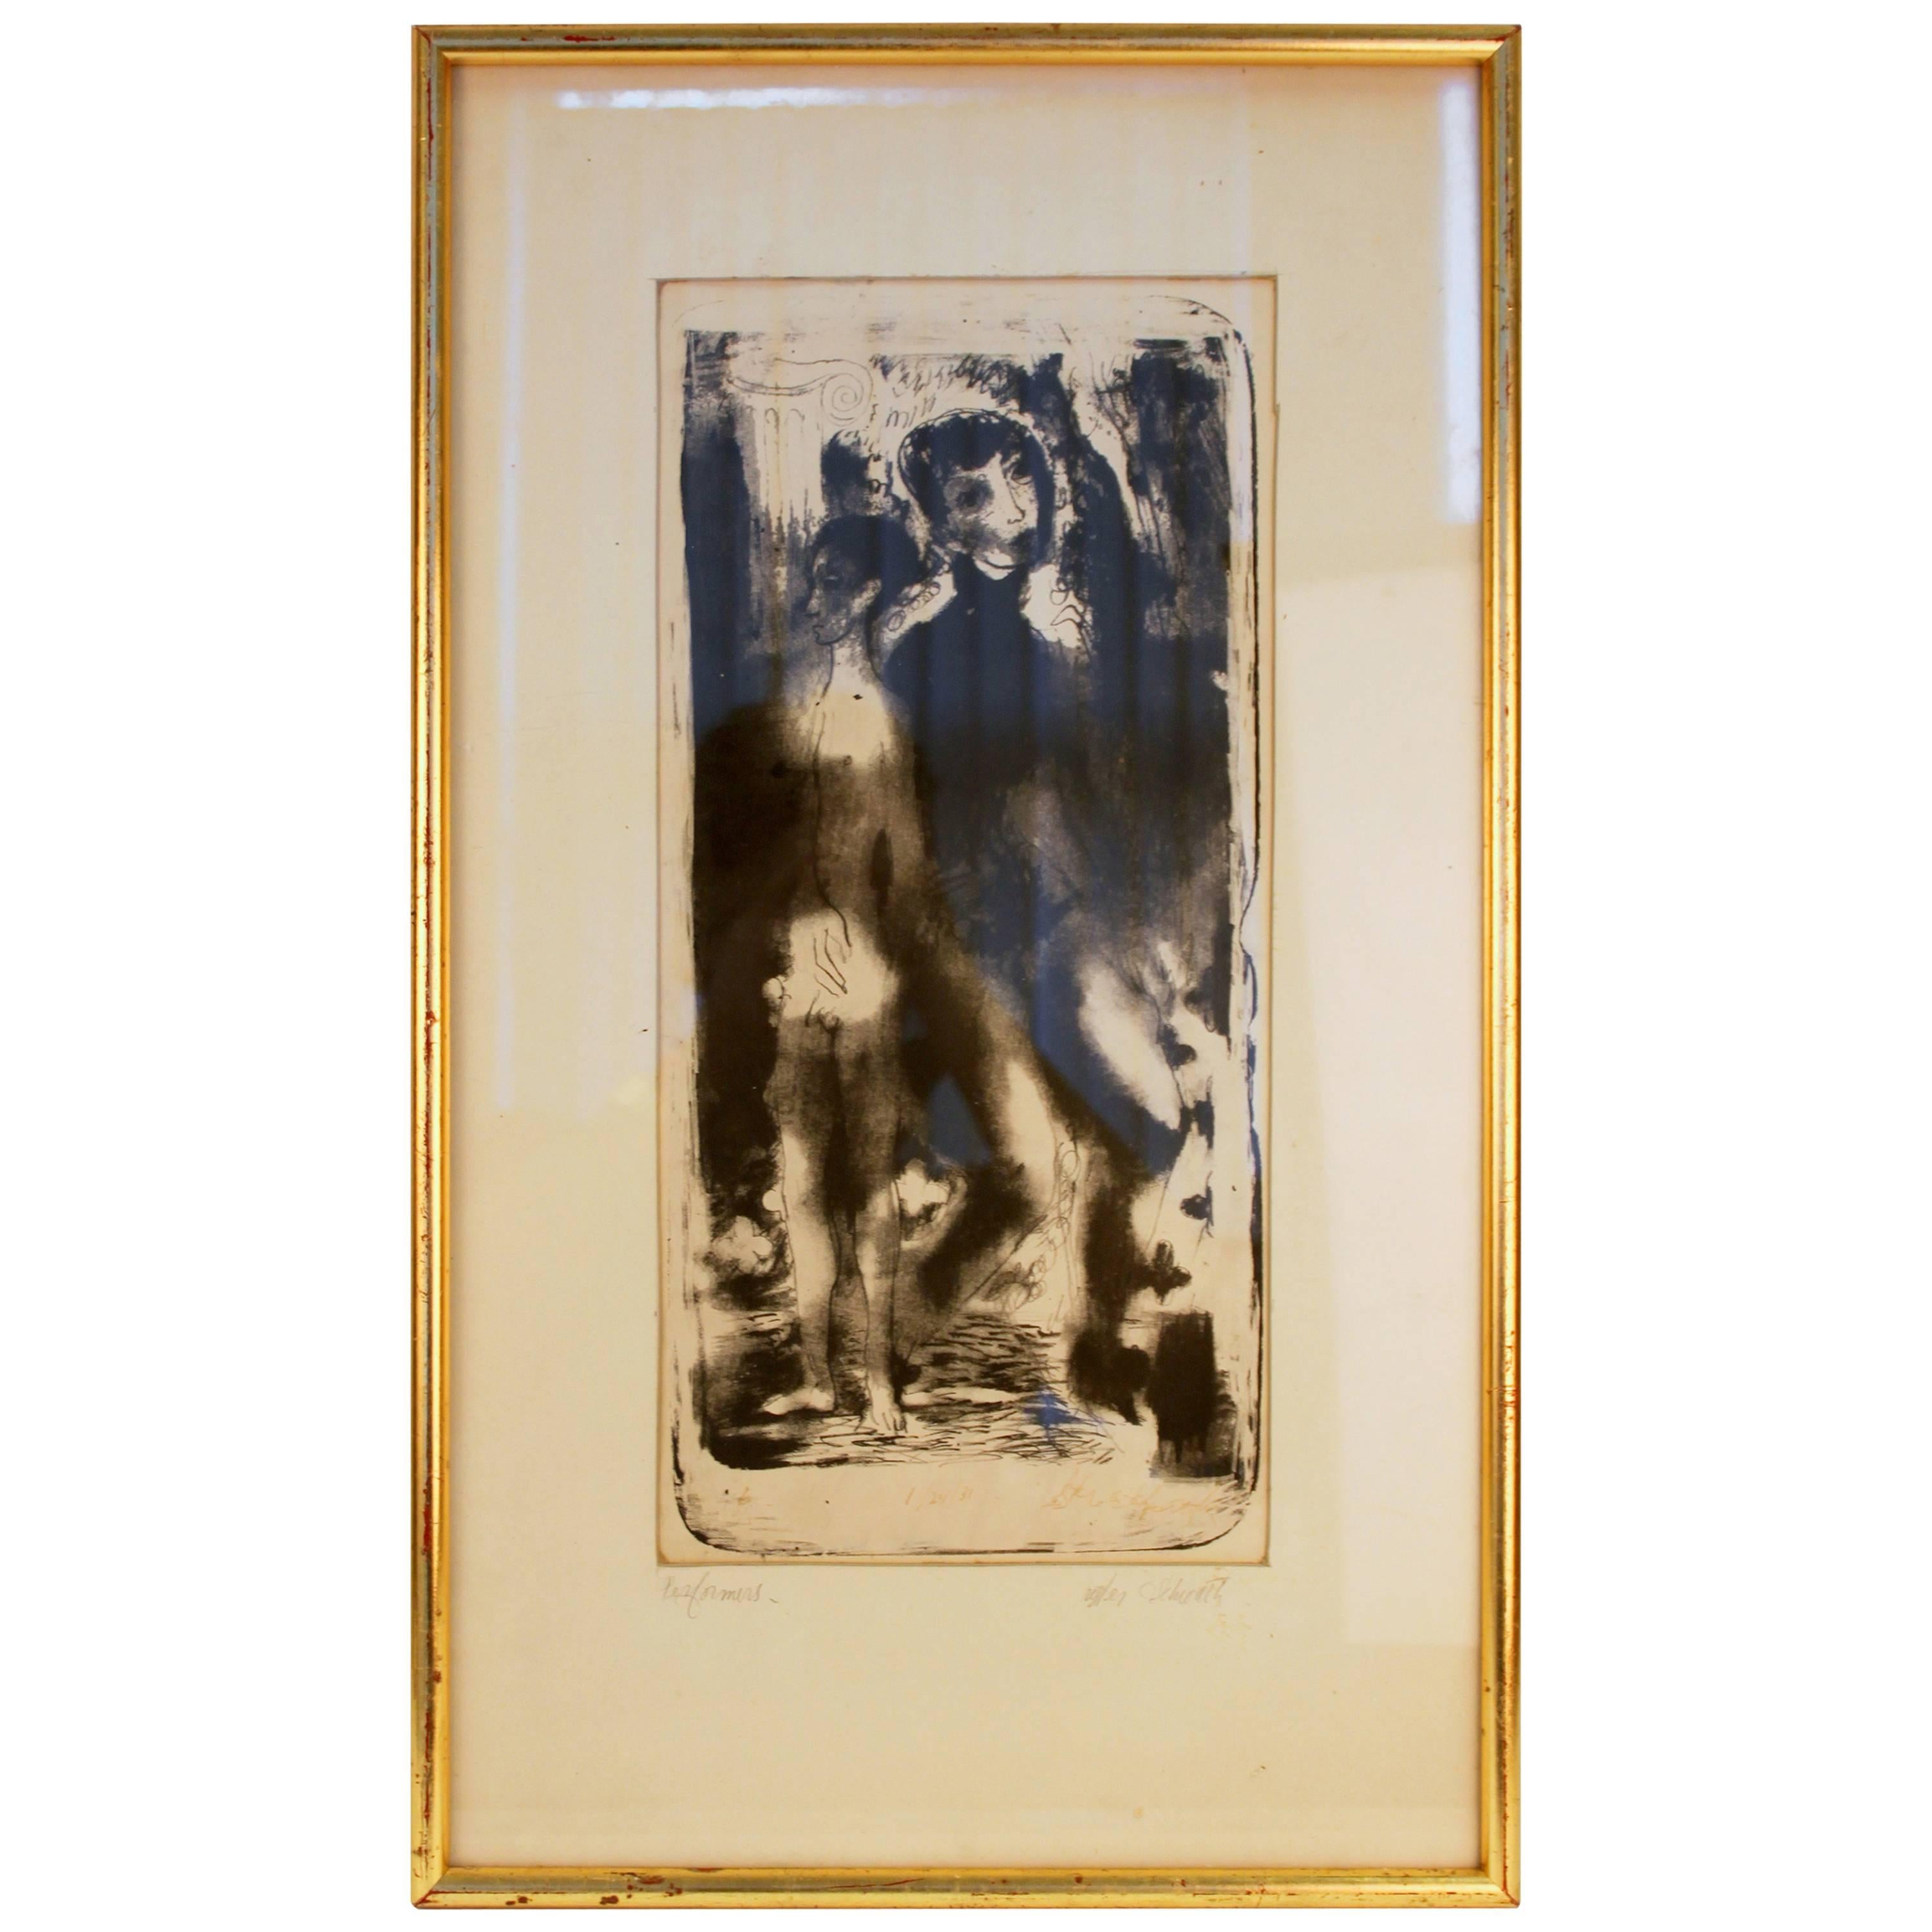 "Performers" Limited Edition Fine Print Drawing by Lester O. Schwartz, 1931